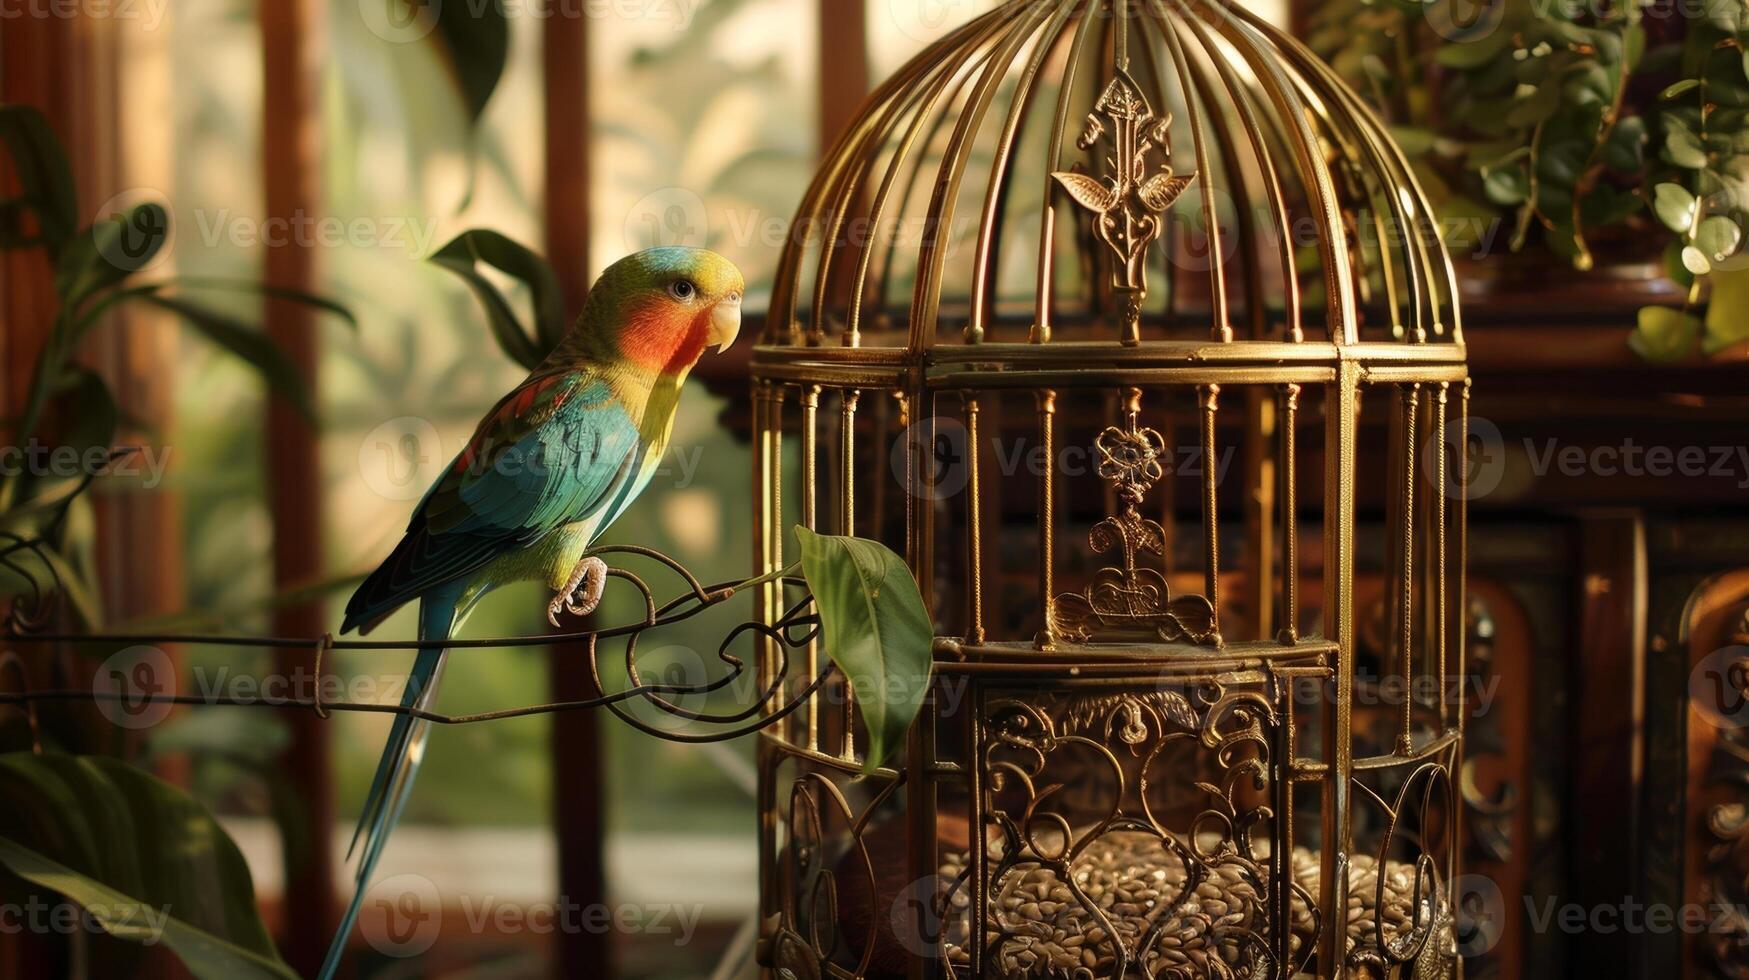 A fancy birdcage stands in a corner of the room complete with a golden frame and intricate details housing a brightly colored parakeet who enjoys gourmet seed mix photo